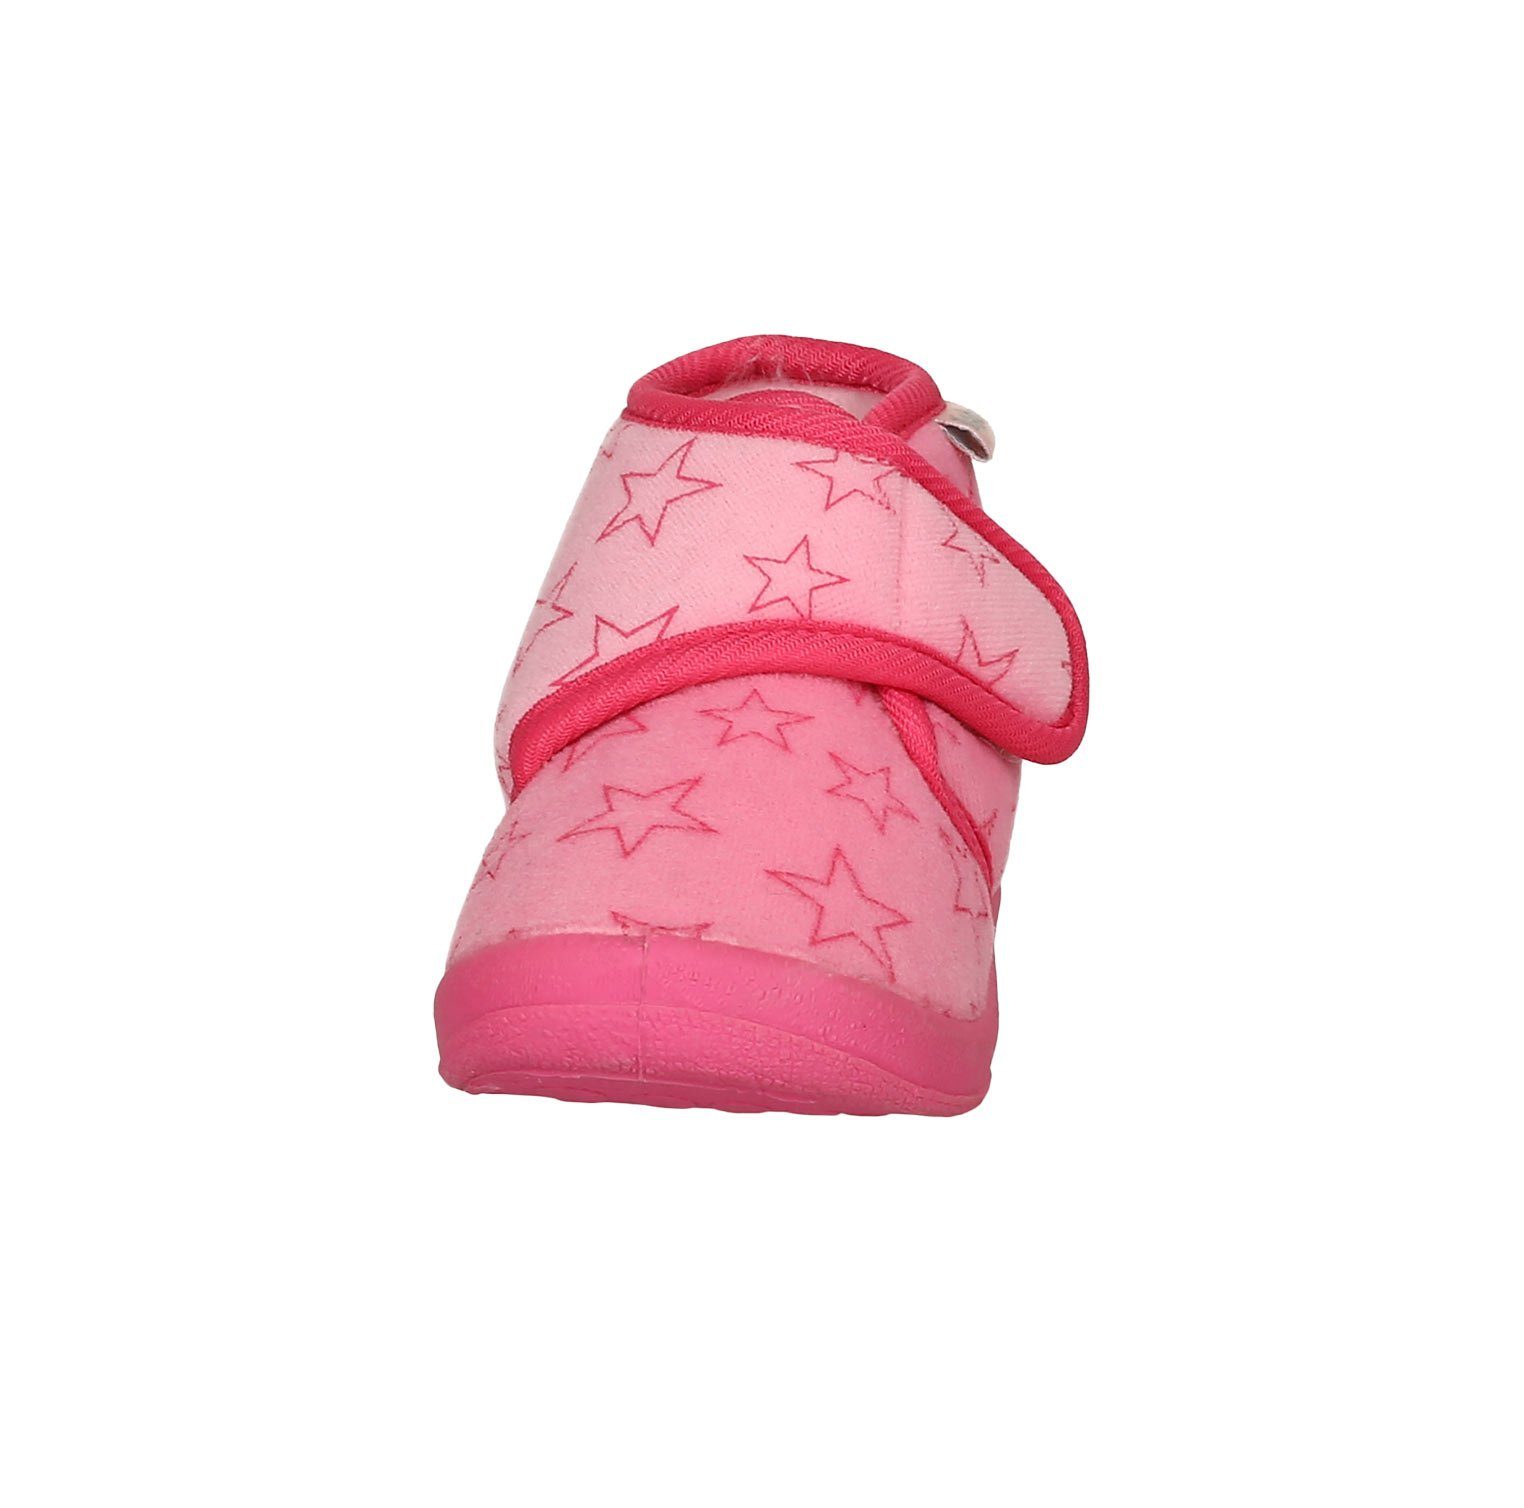 Playshoes Hausschuh Pastell Hausschuh Rosa